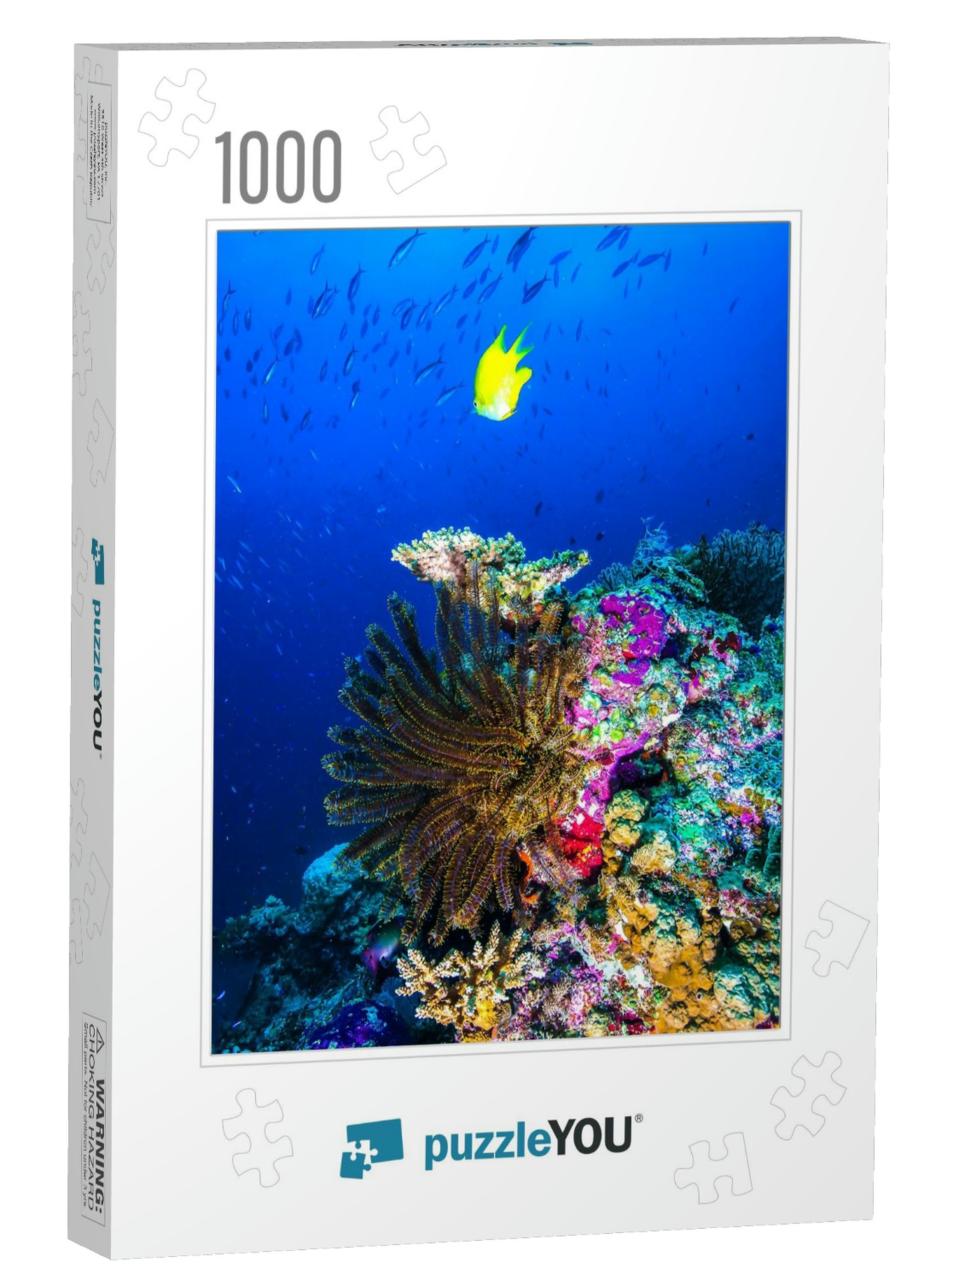 Underwater Coral Fish Vertical Scene. Yellow Coral Fish i... Jigsaw Puzzle with 1000 pieces